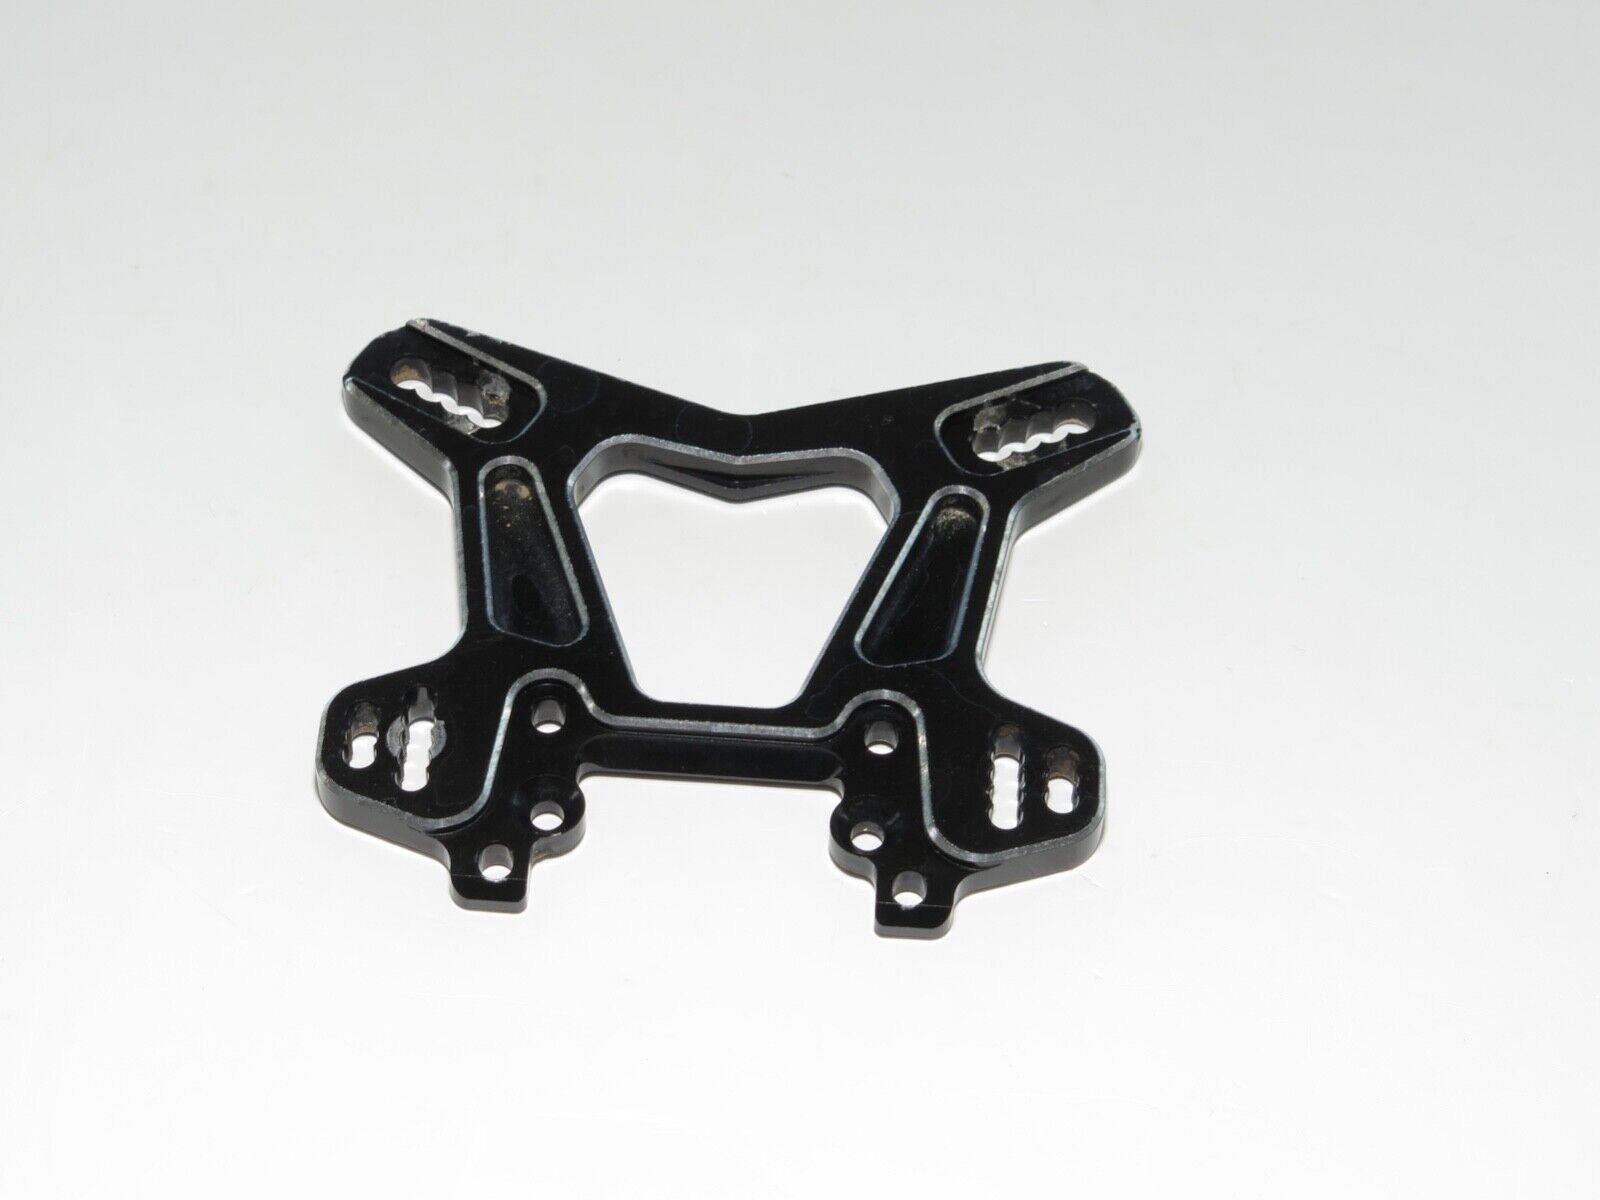 L8-1007 Team Losi TLR 8ight X Elite buggy front shock tower